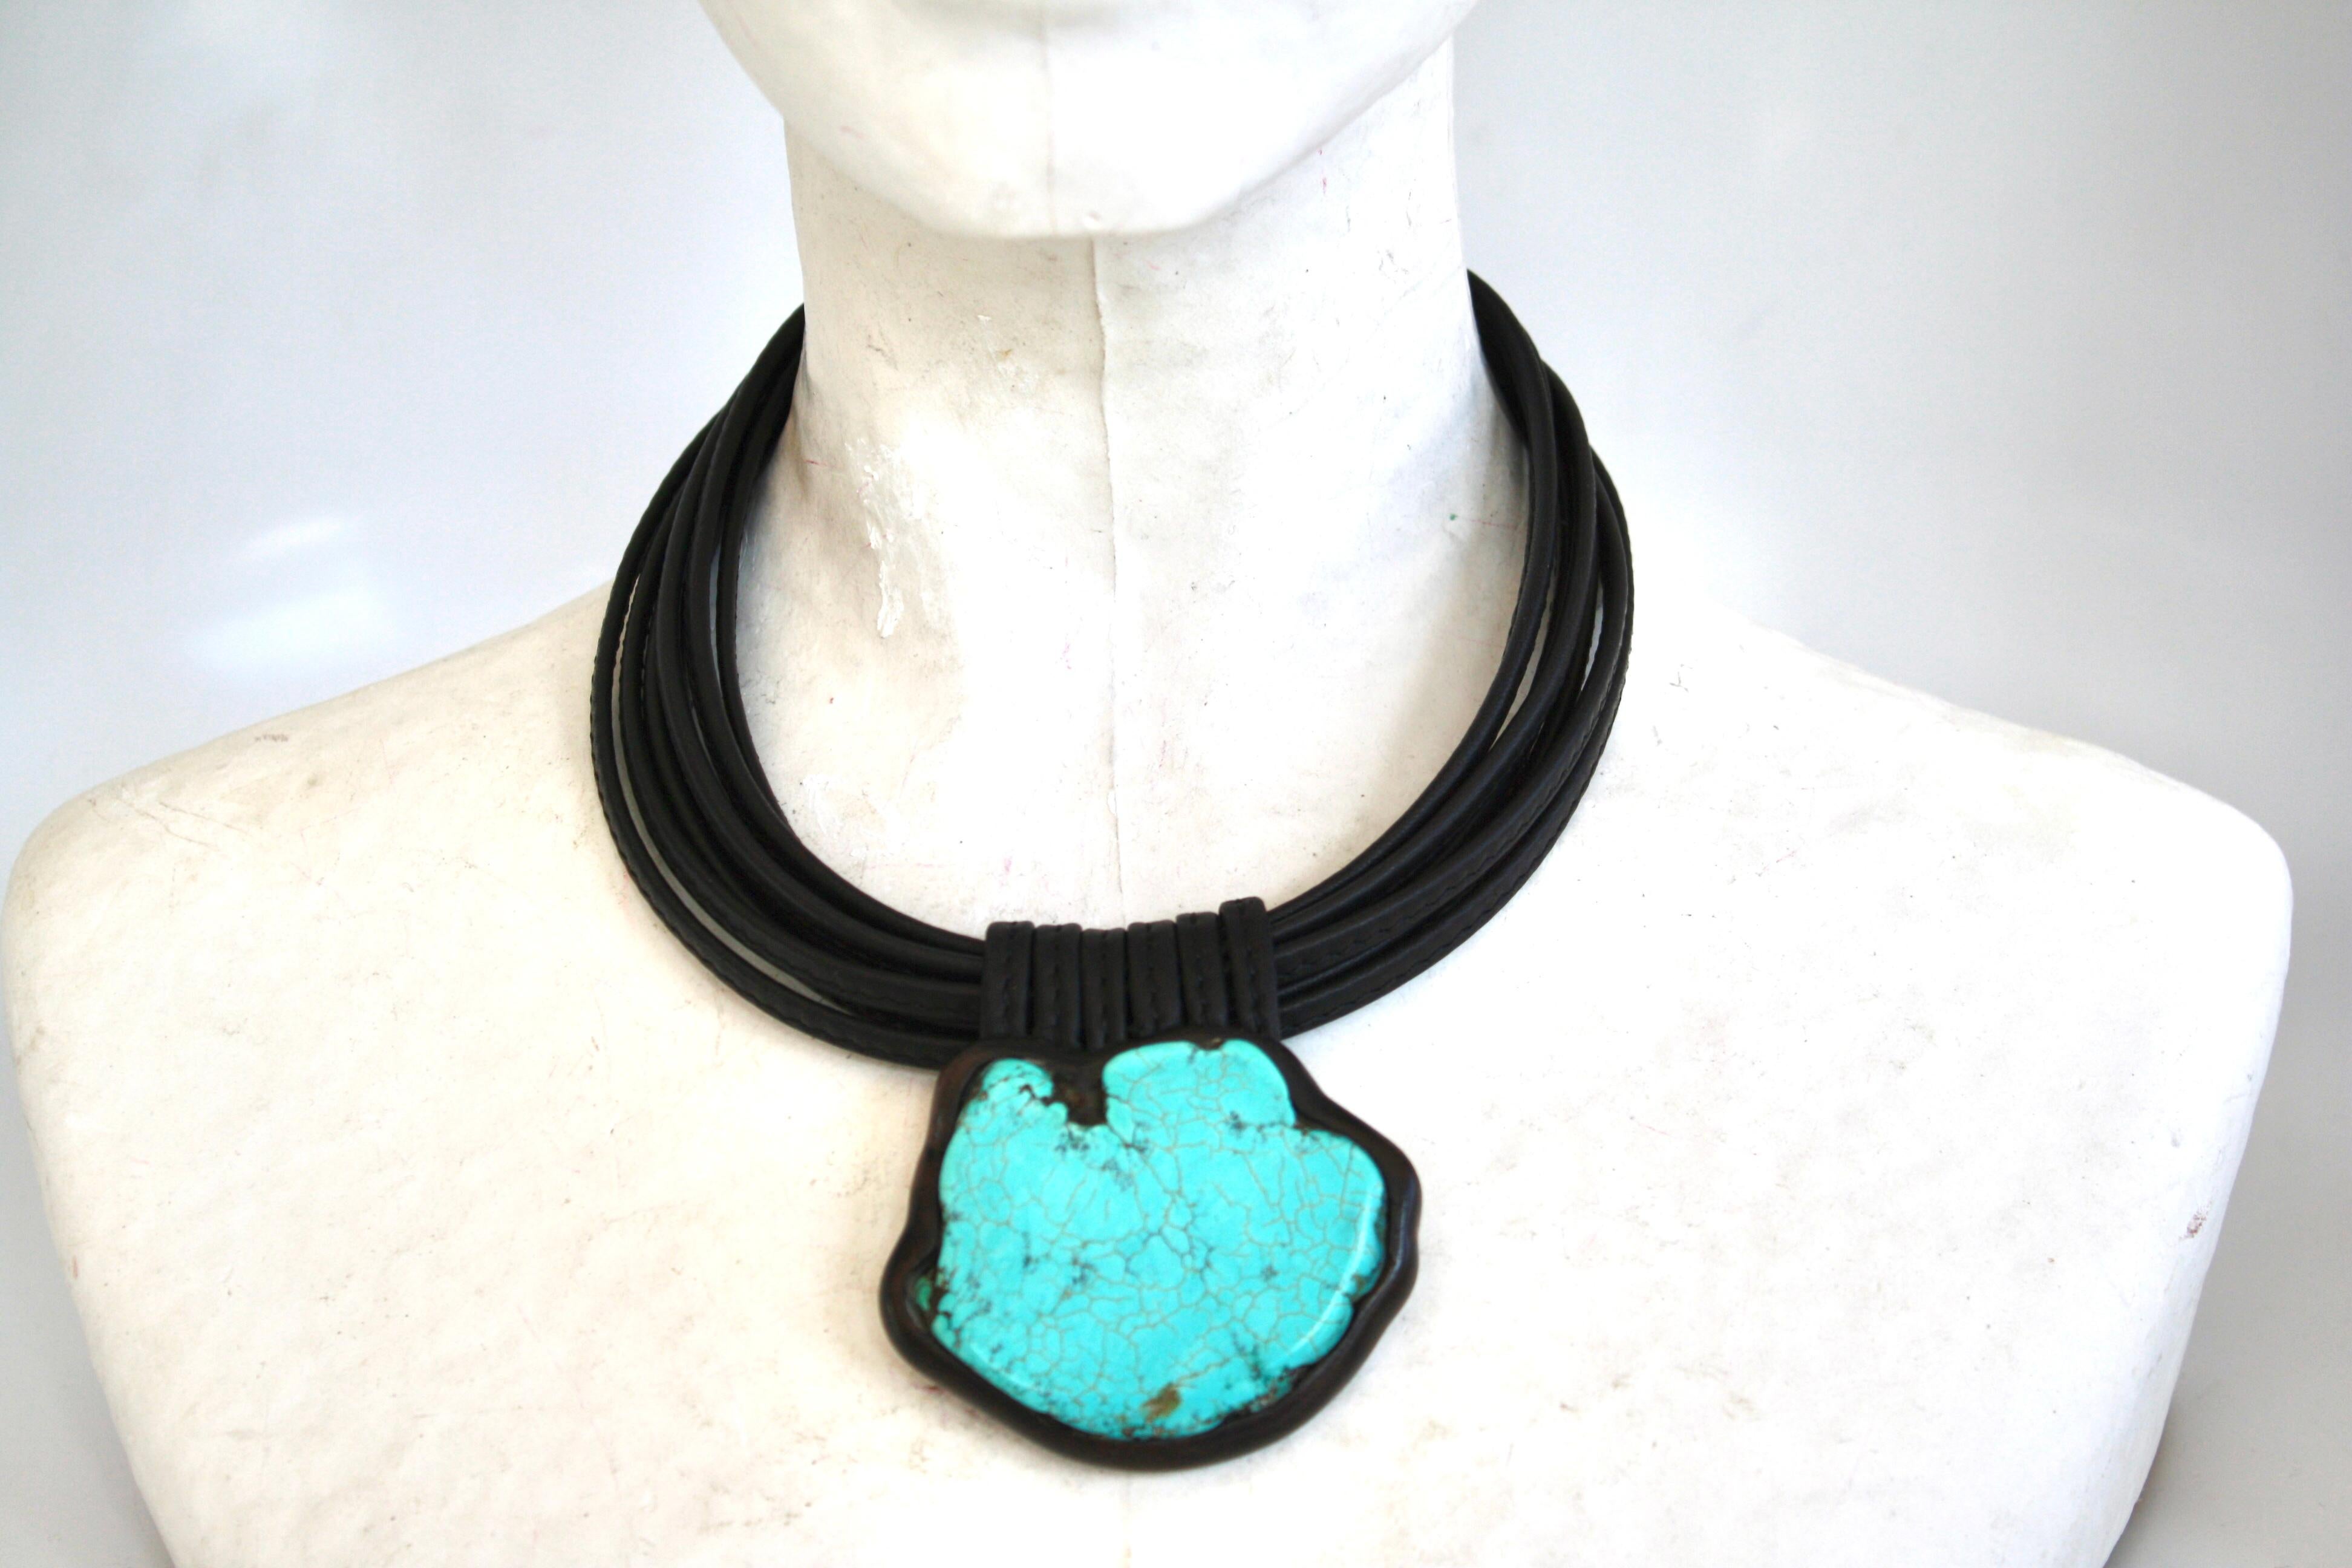 7 strand leather necklace with turquoise drop from Monies, Denmark. 